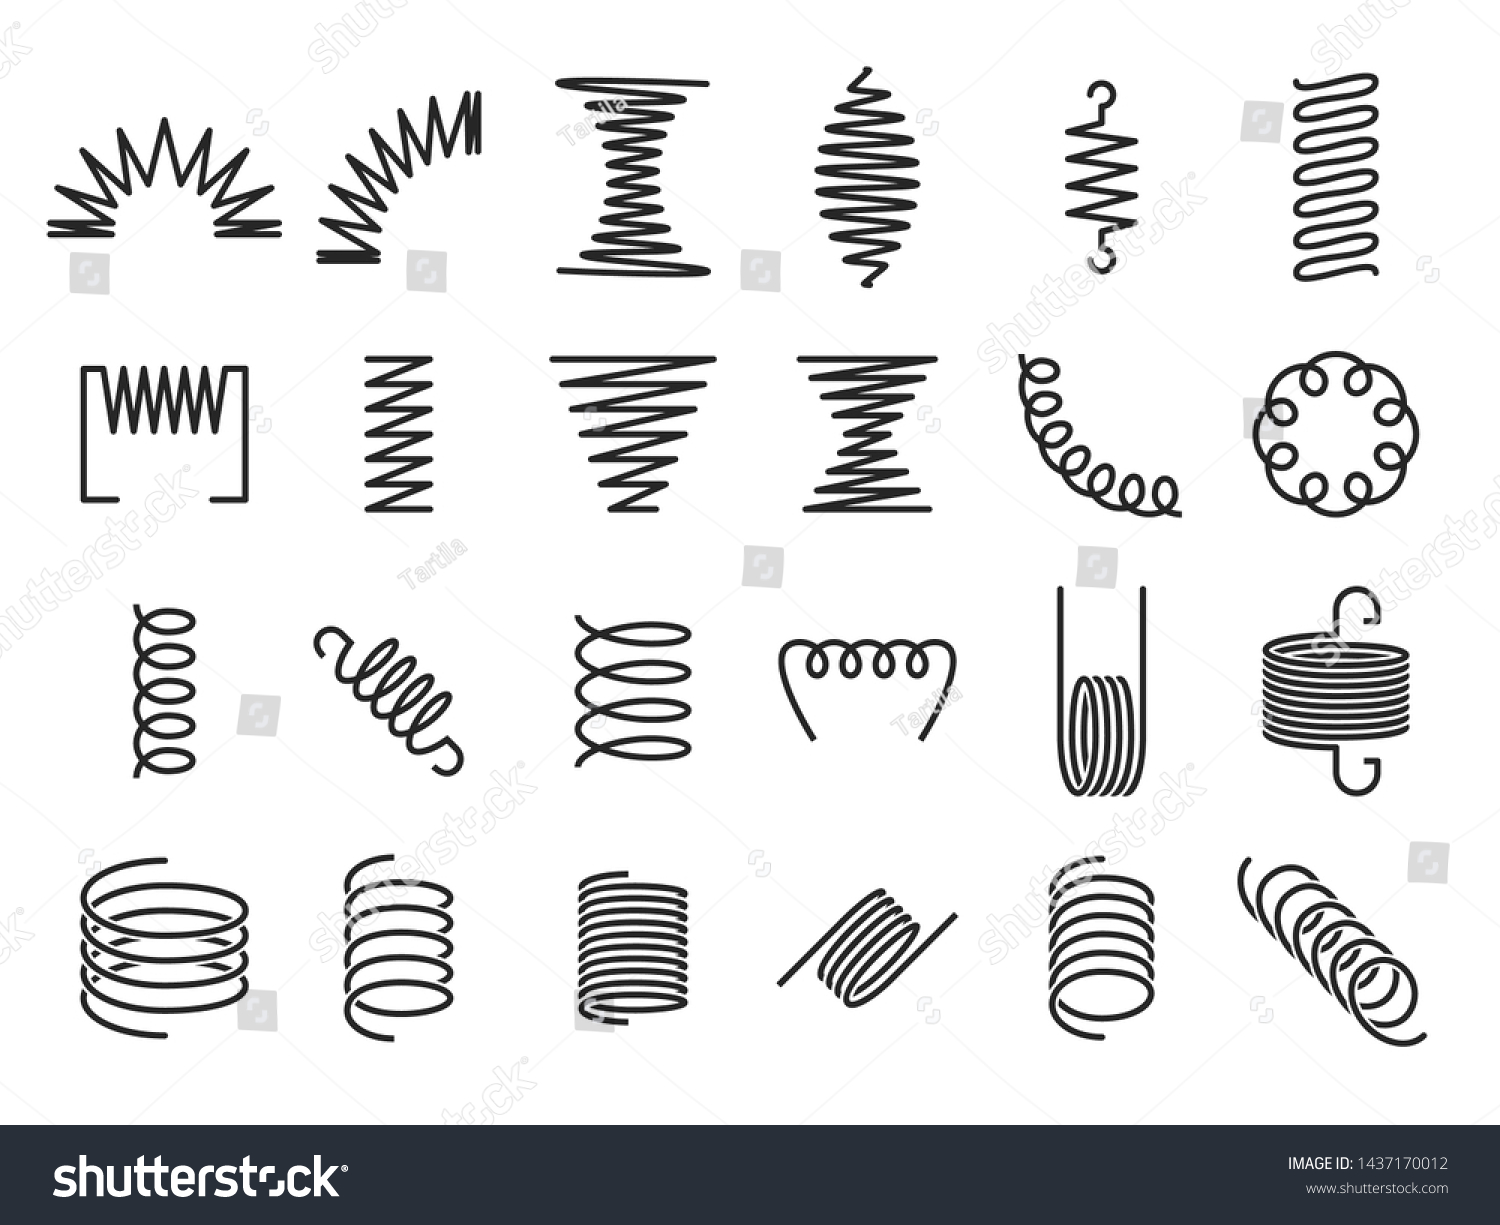 Spring coils. Metal spiral springs, metallic coil and linear spirals silhouette. Vape or machine steel coil, twisted spiral flexibility spring part. Isolated vector icon set #1437170012